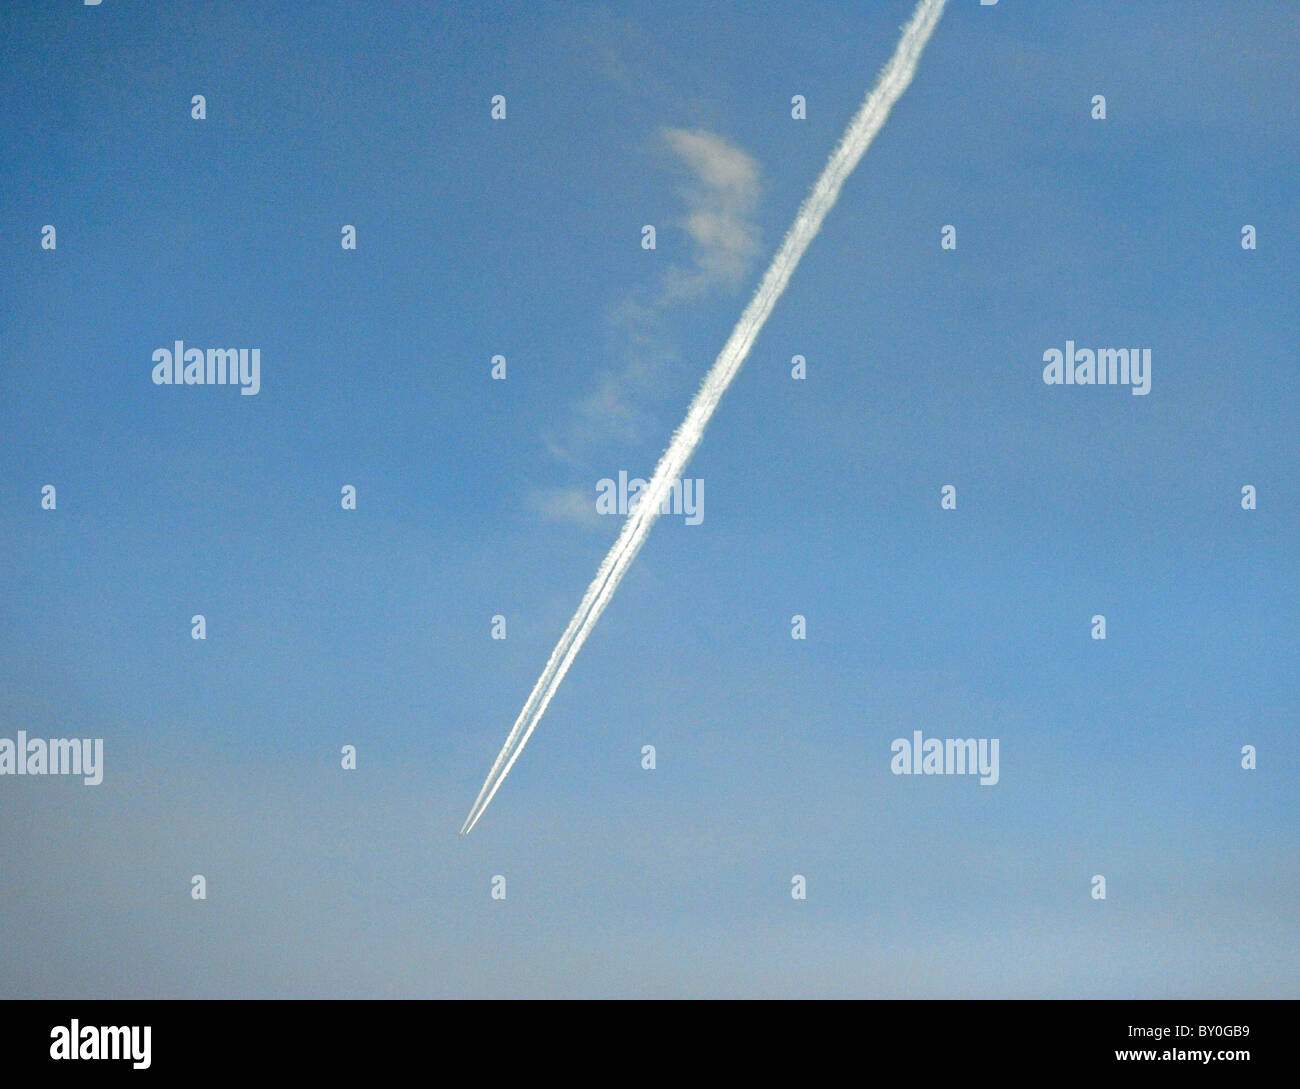 Jet airliner aeroplane vapour trail against blue sky Stock Photo